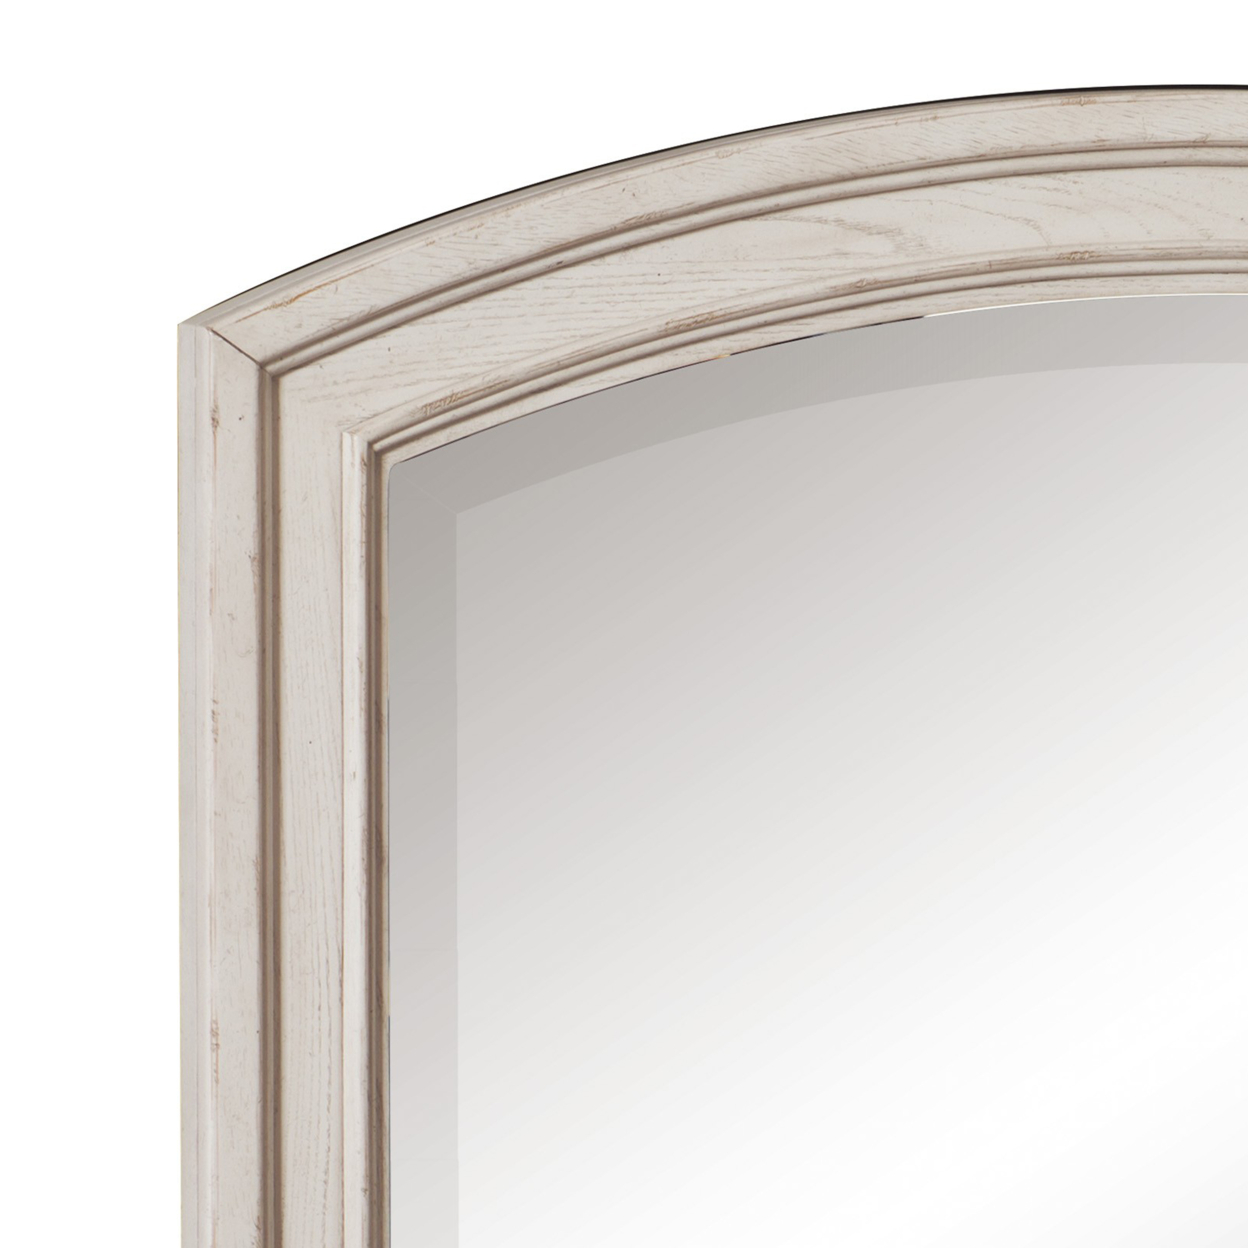 Wooden Bevelled Mirror With Raised Edges And Curved Top, Antique White- Saltoro Sherpi